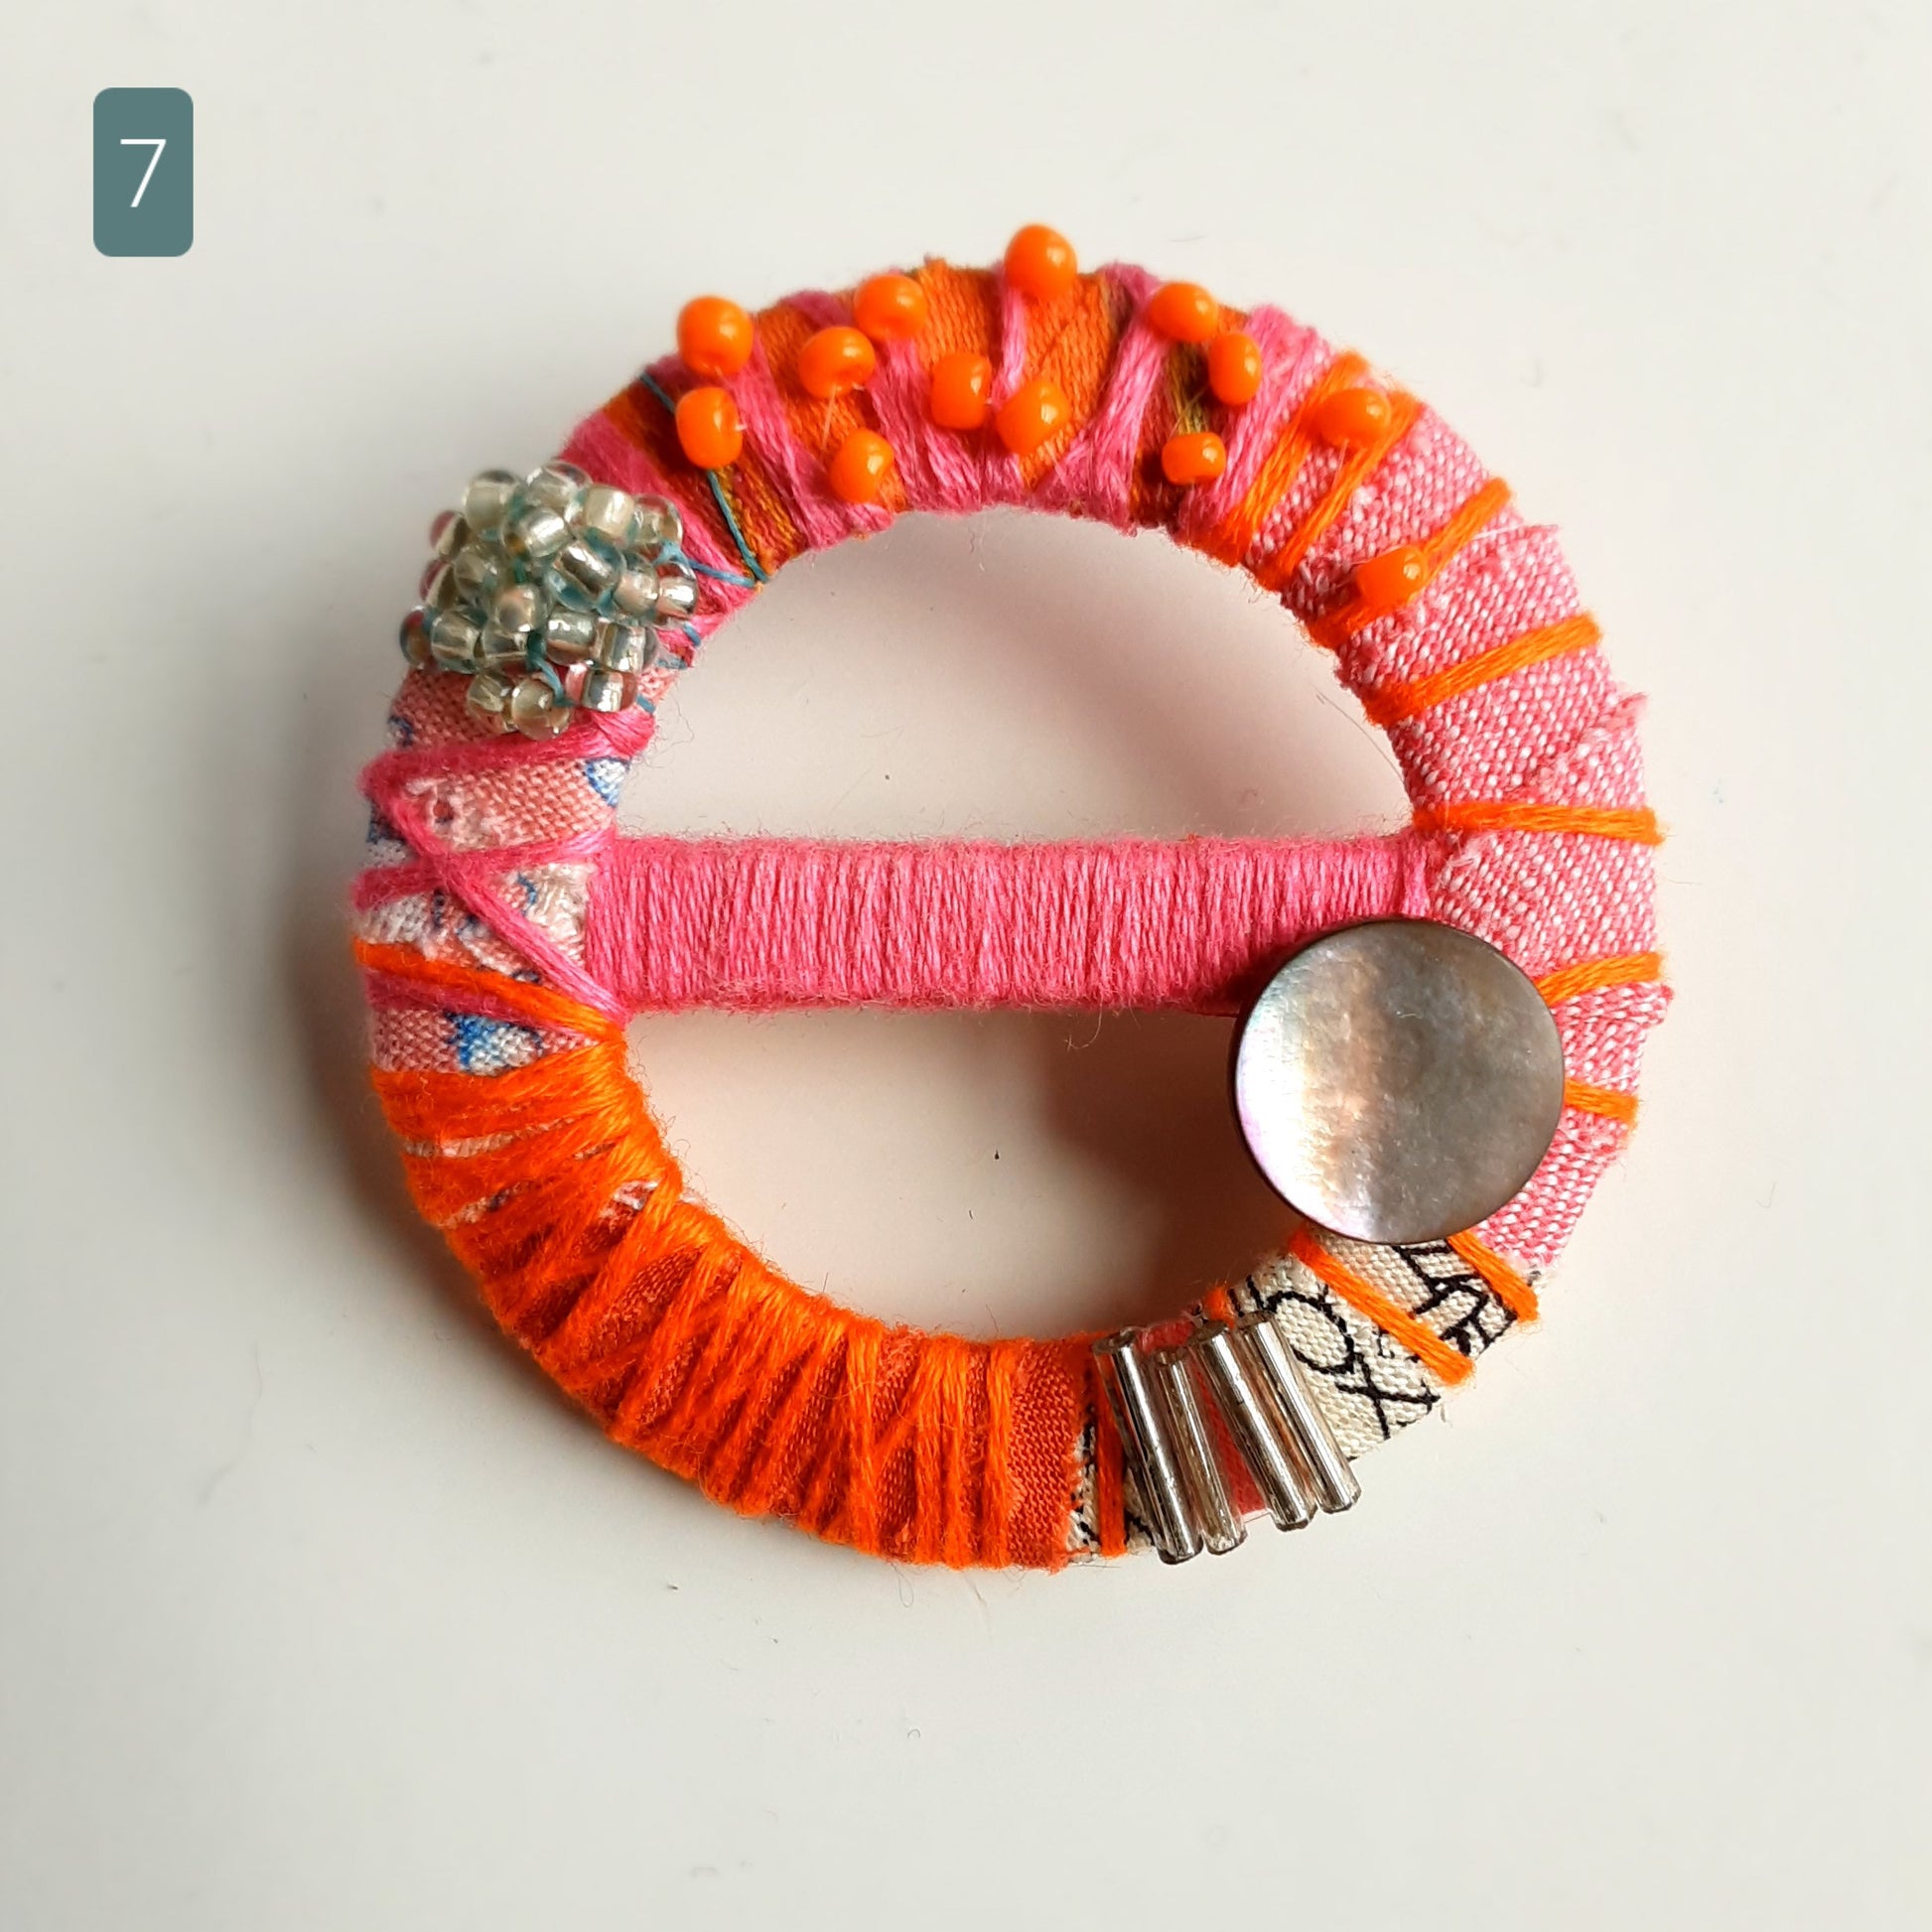 Beautiful statement textile brooch made from pink and orange fabrics and threads. Background is white.